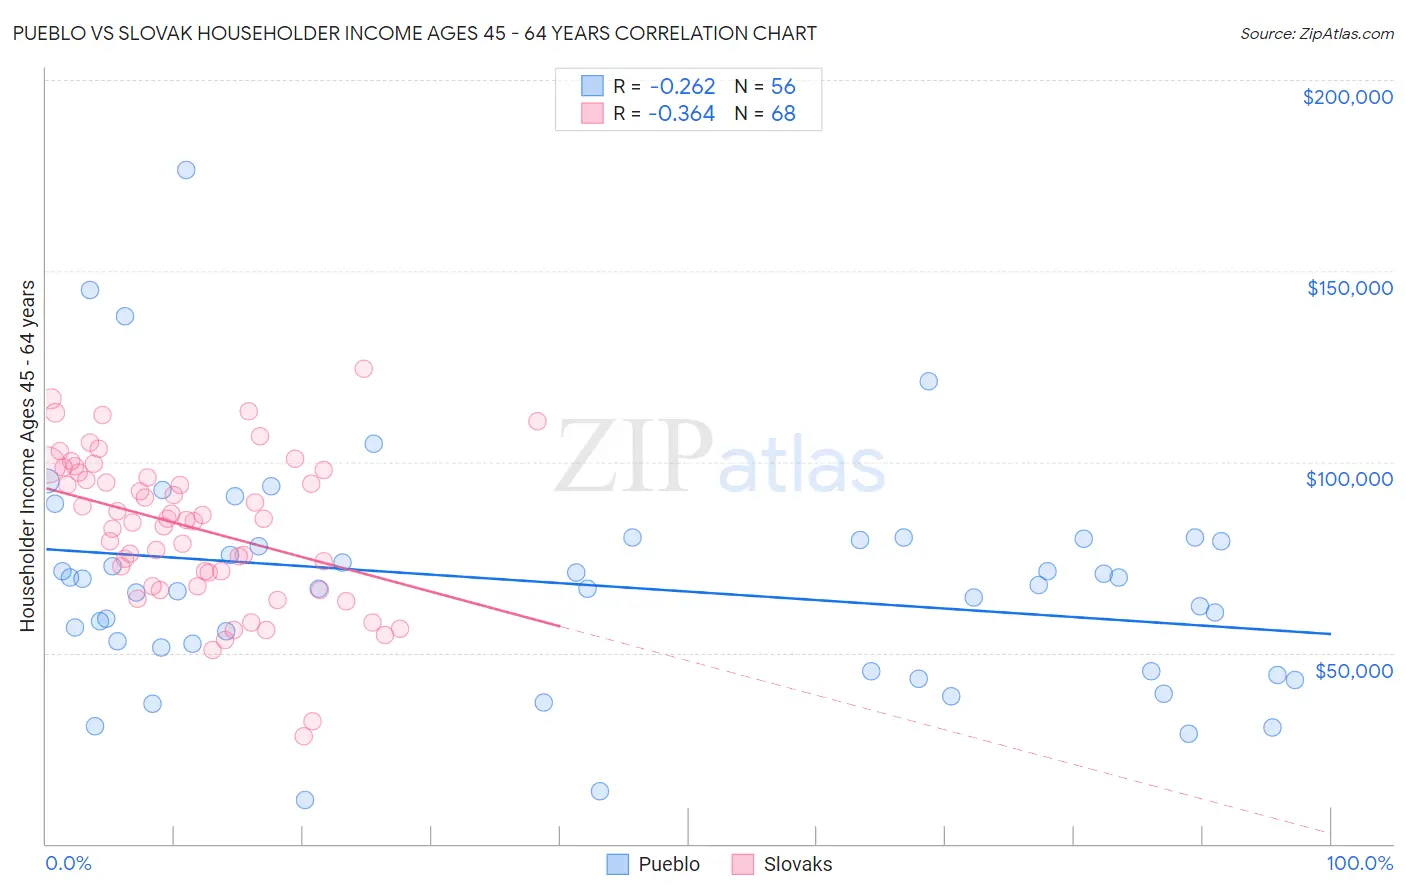 Pueblo vs Slovak Householder Income Ages 45 - 64 years